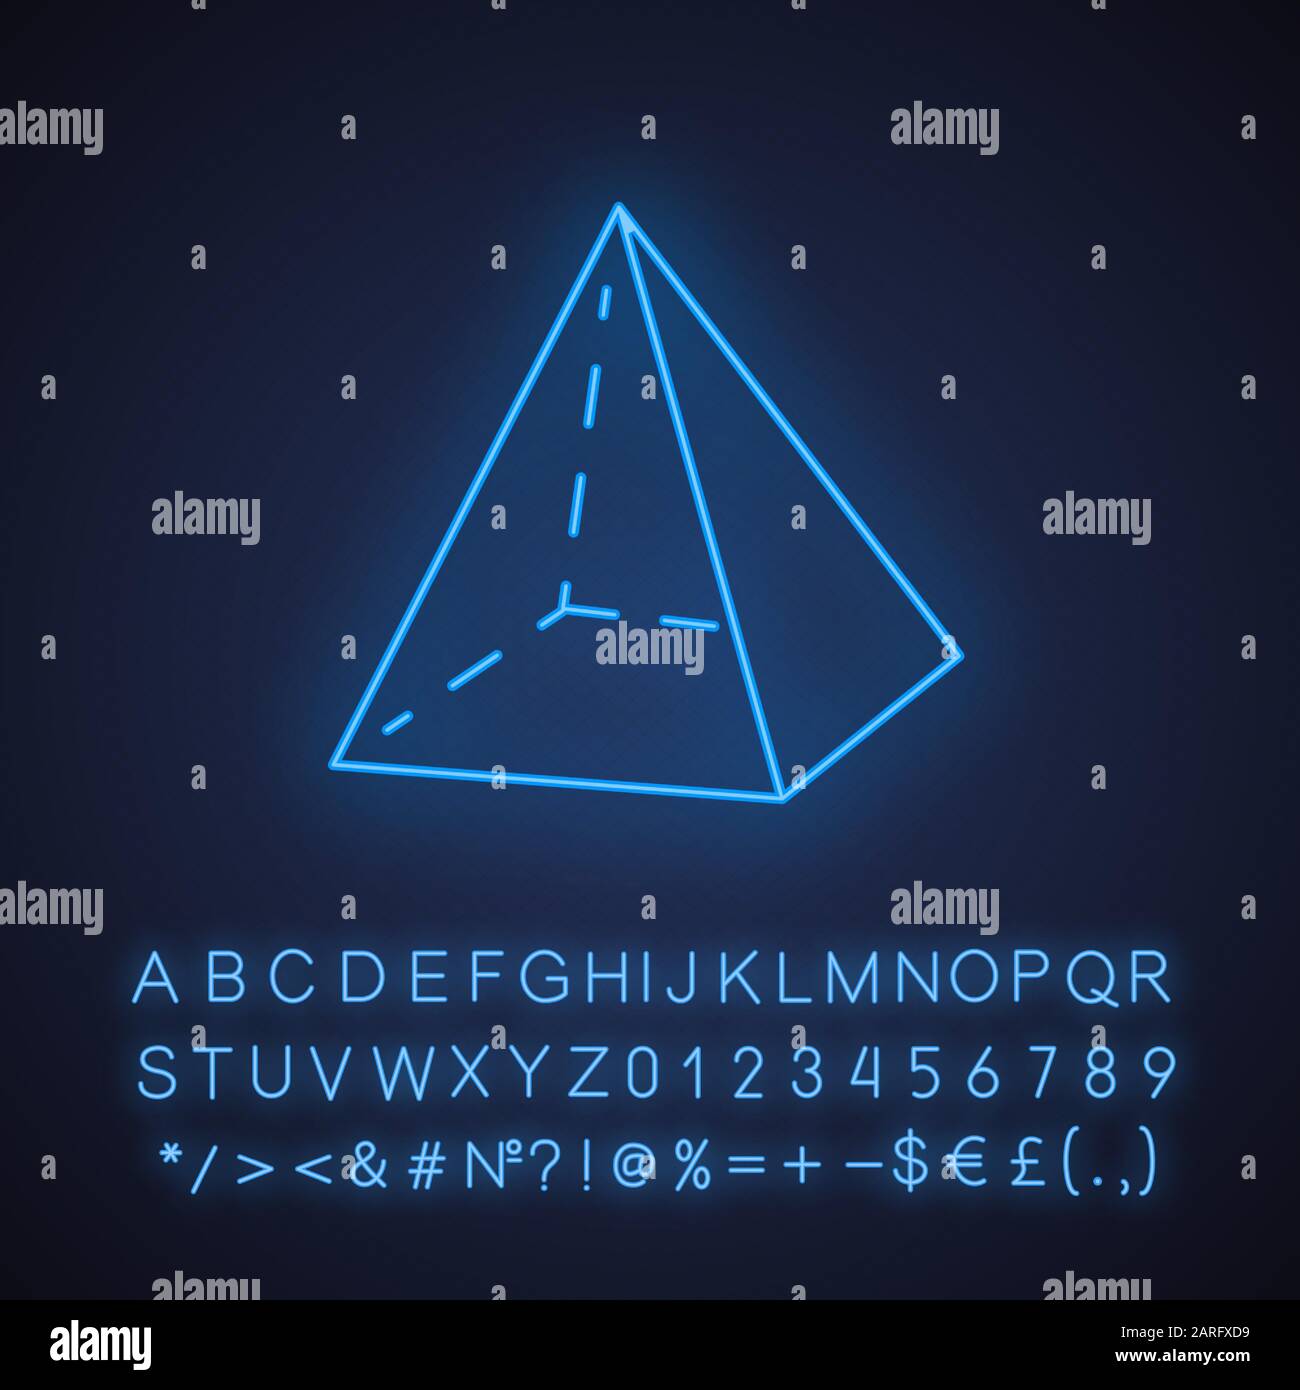 Pyramid neon light icon. Transparent geometric figure. Abstract shape. Isometric form with triangular sides. Glowing sign with alphabet, numbers and s Stock Vector